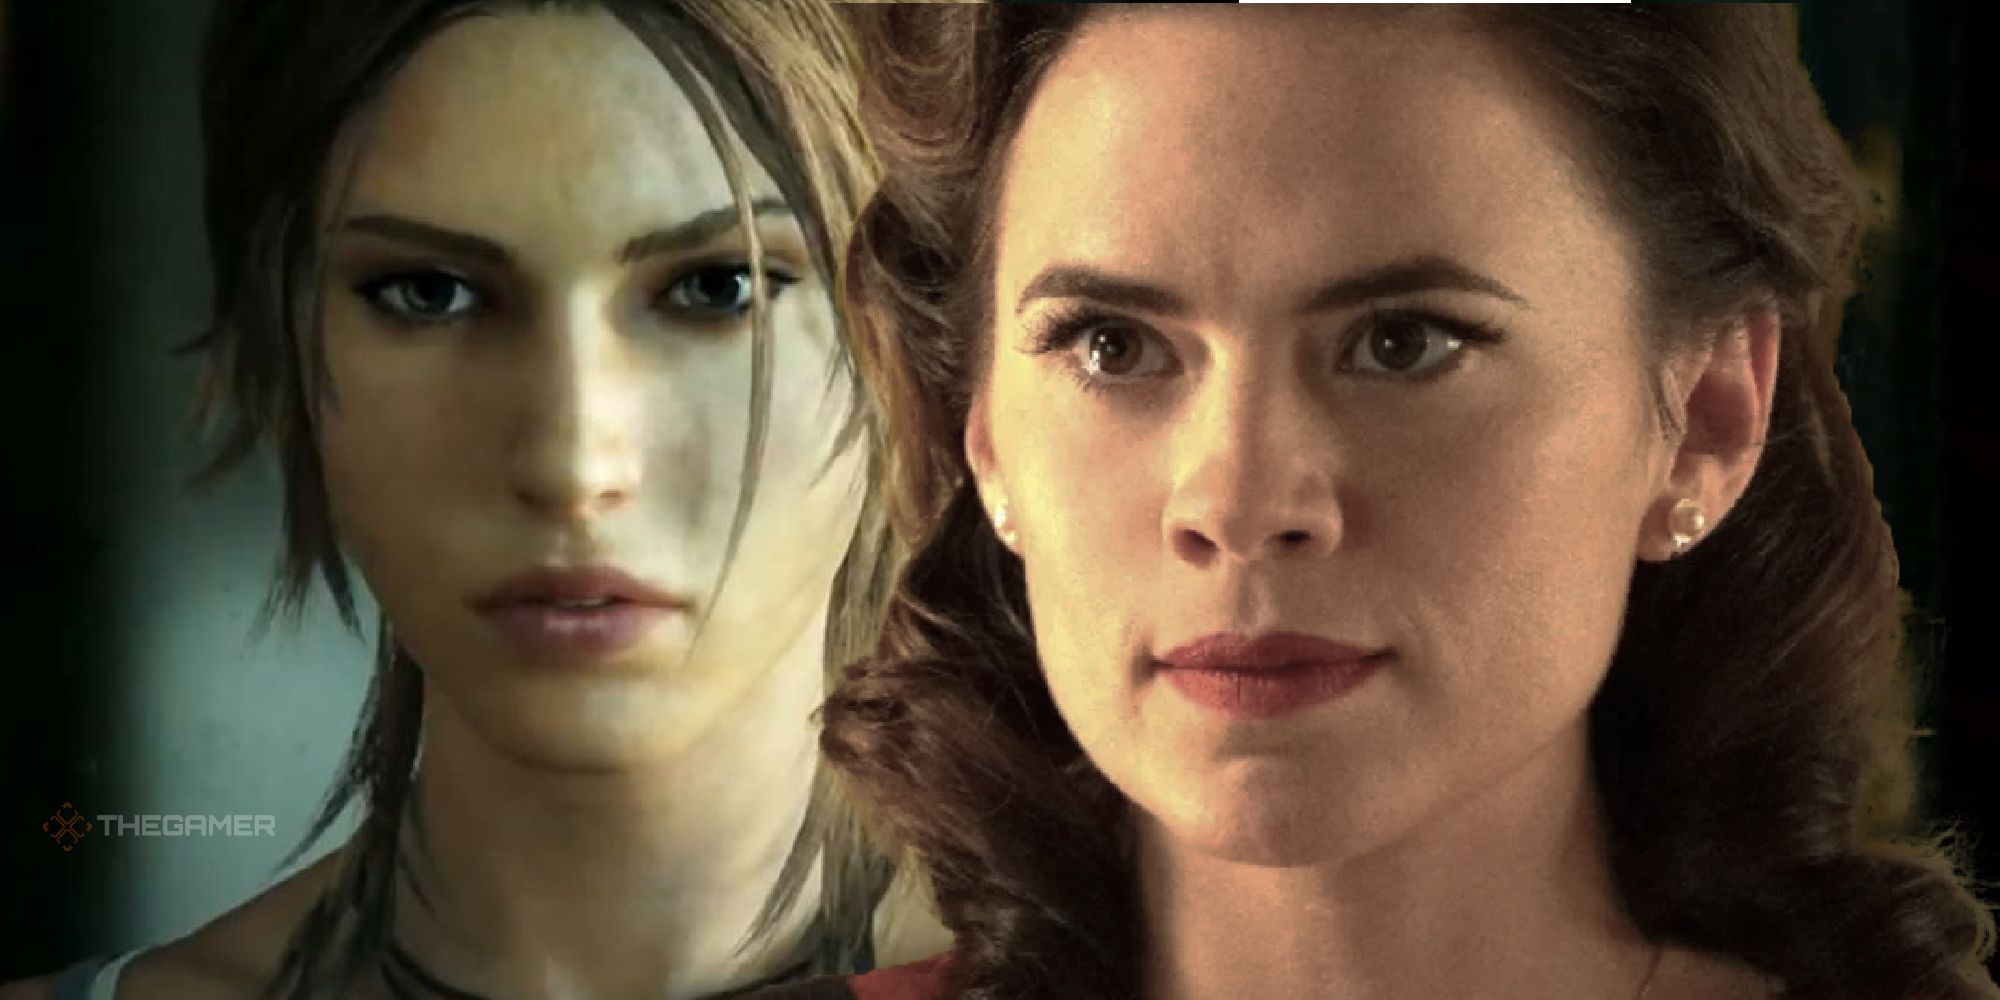 Agent Carter's Hayley Atwell to Voice Lara Croft in Netflix's Tomb